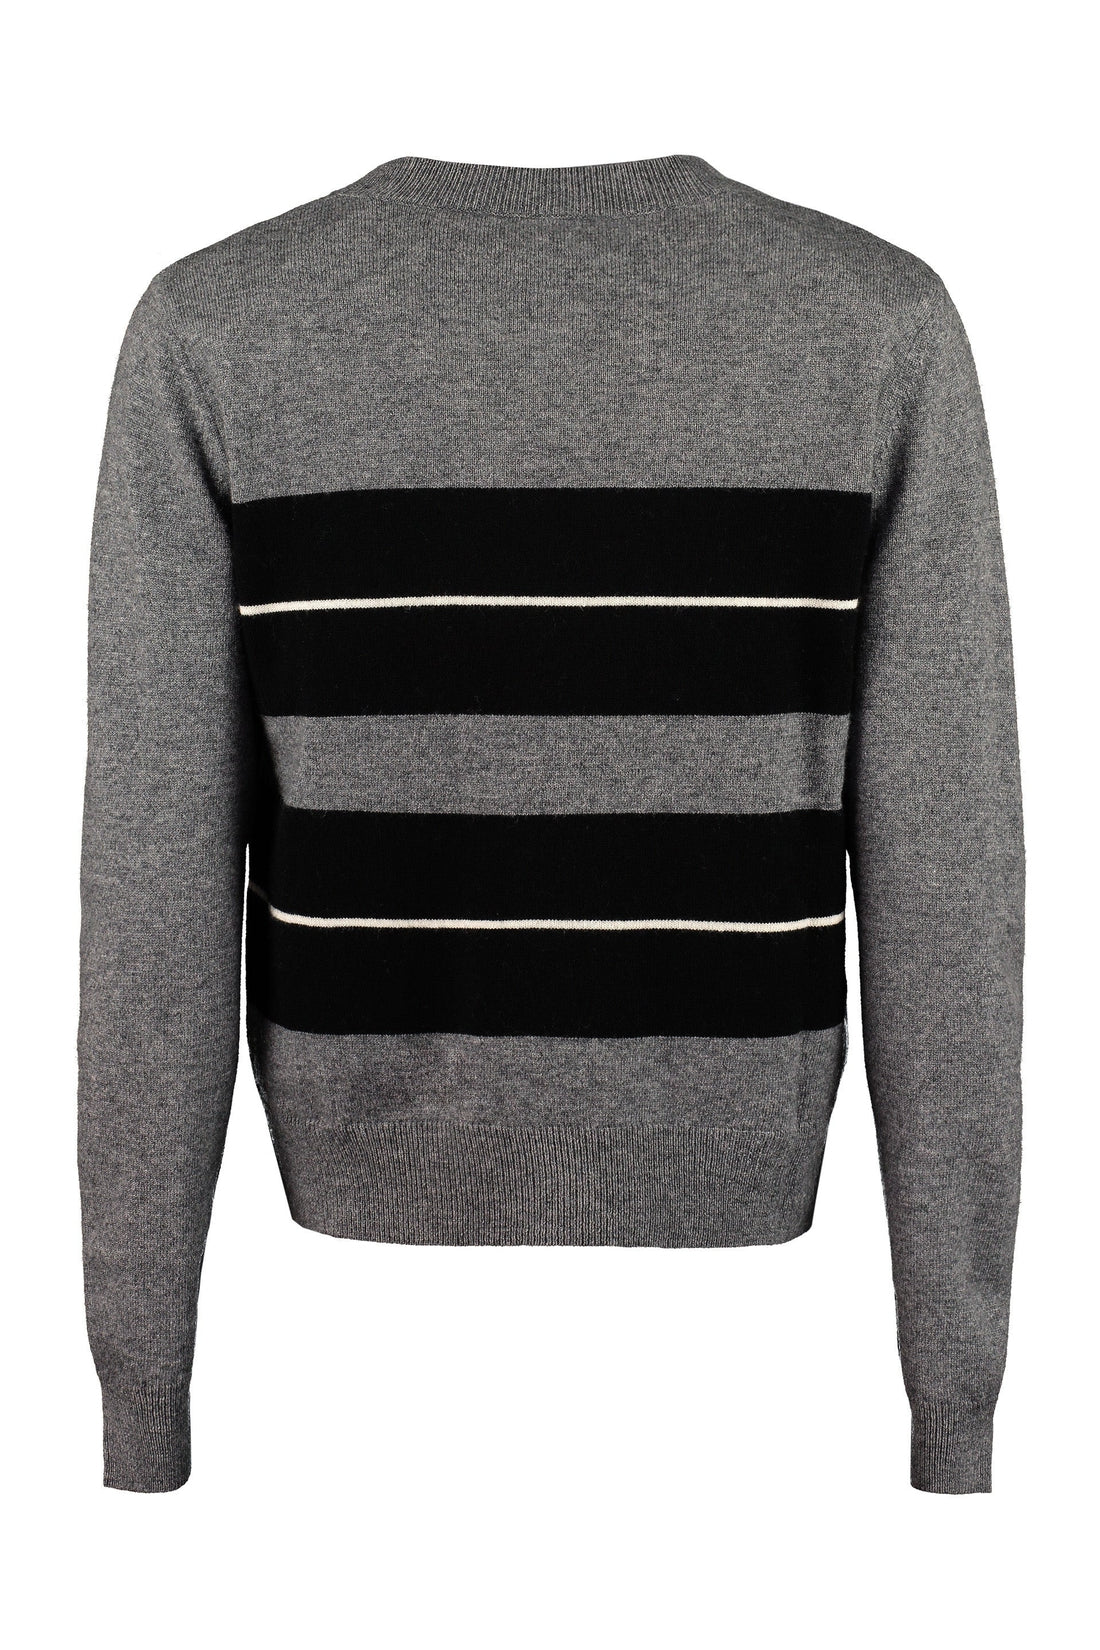 Max Mara-OUTLET-SALE-Popoli wool and cashmere sweater-ARCHIVIST